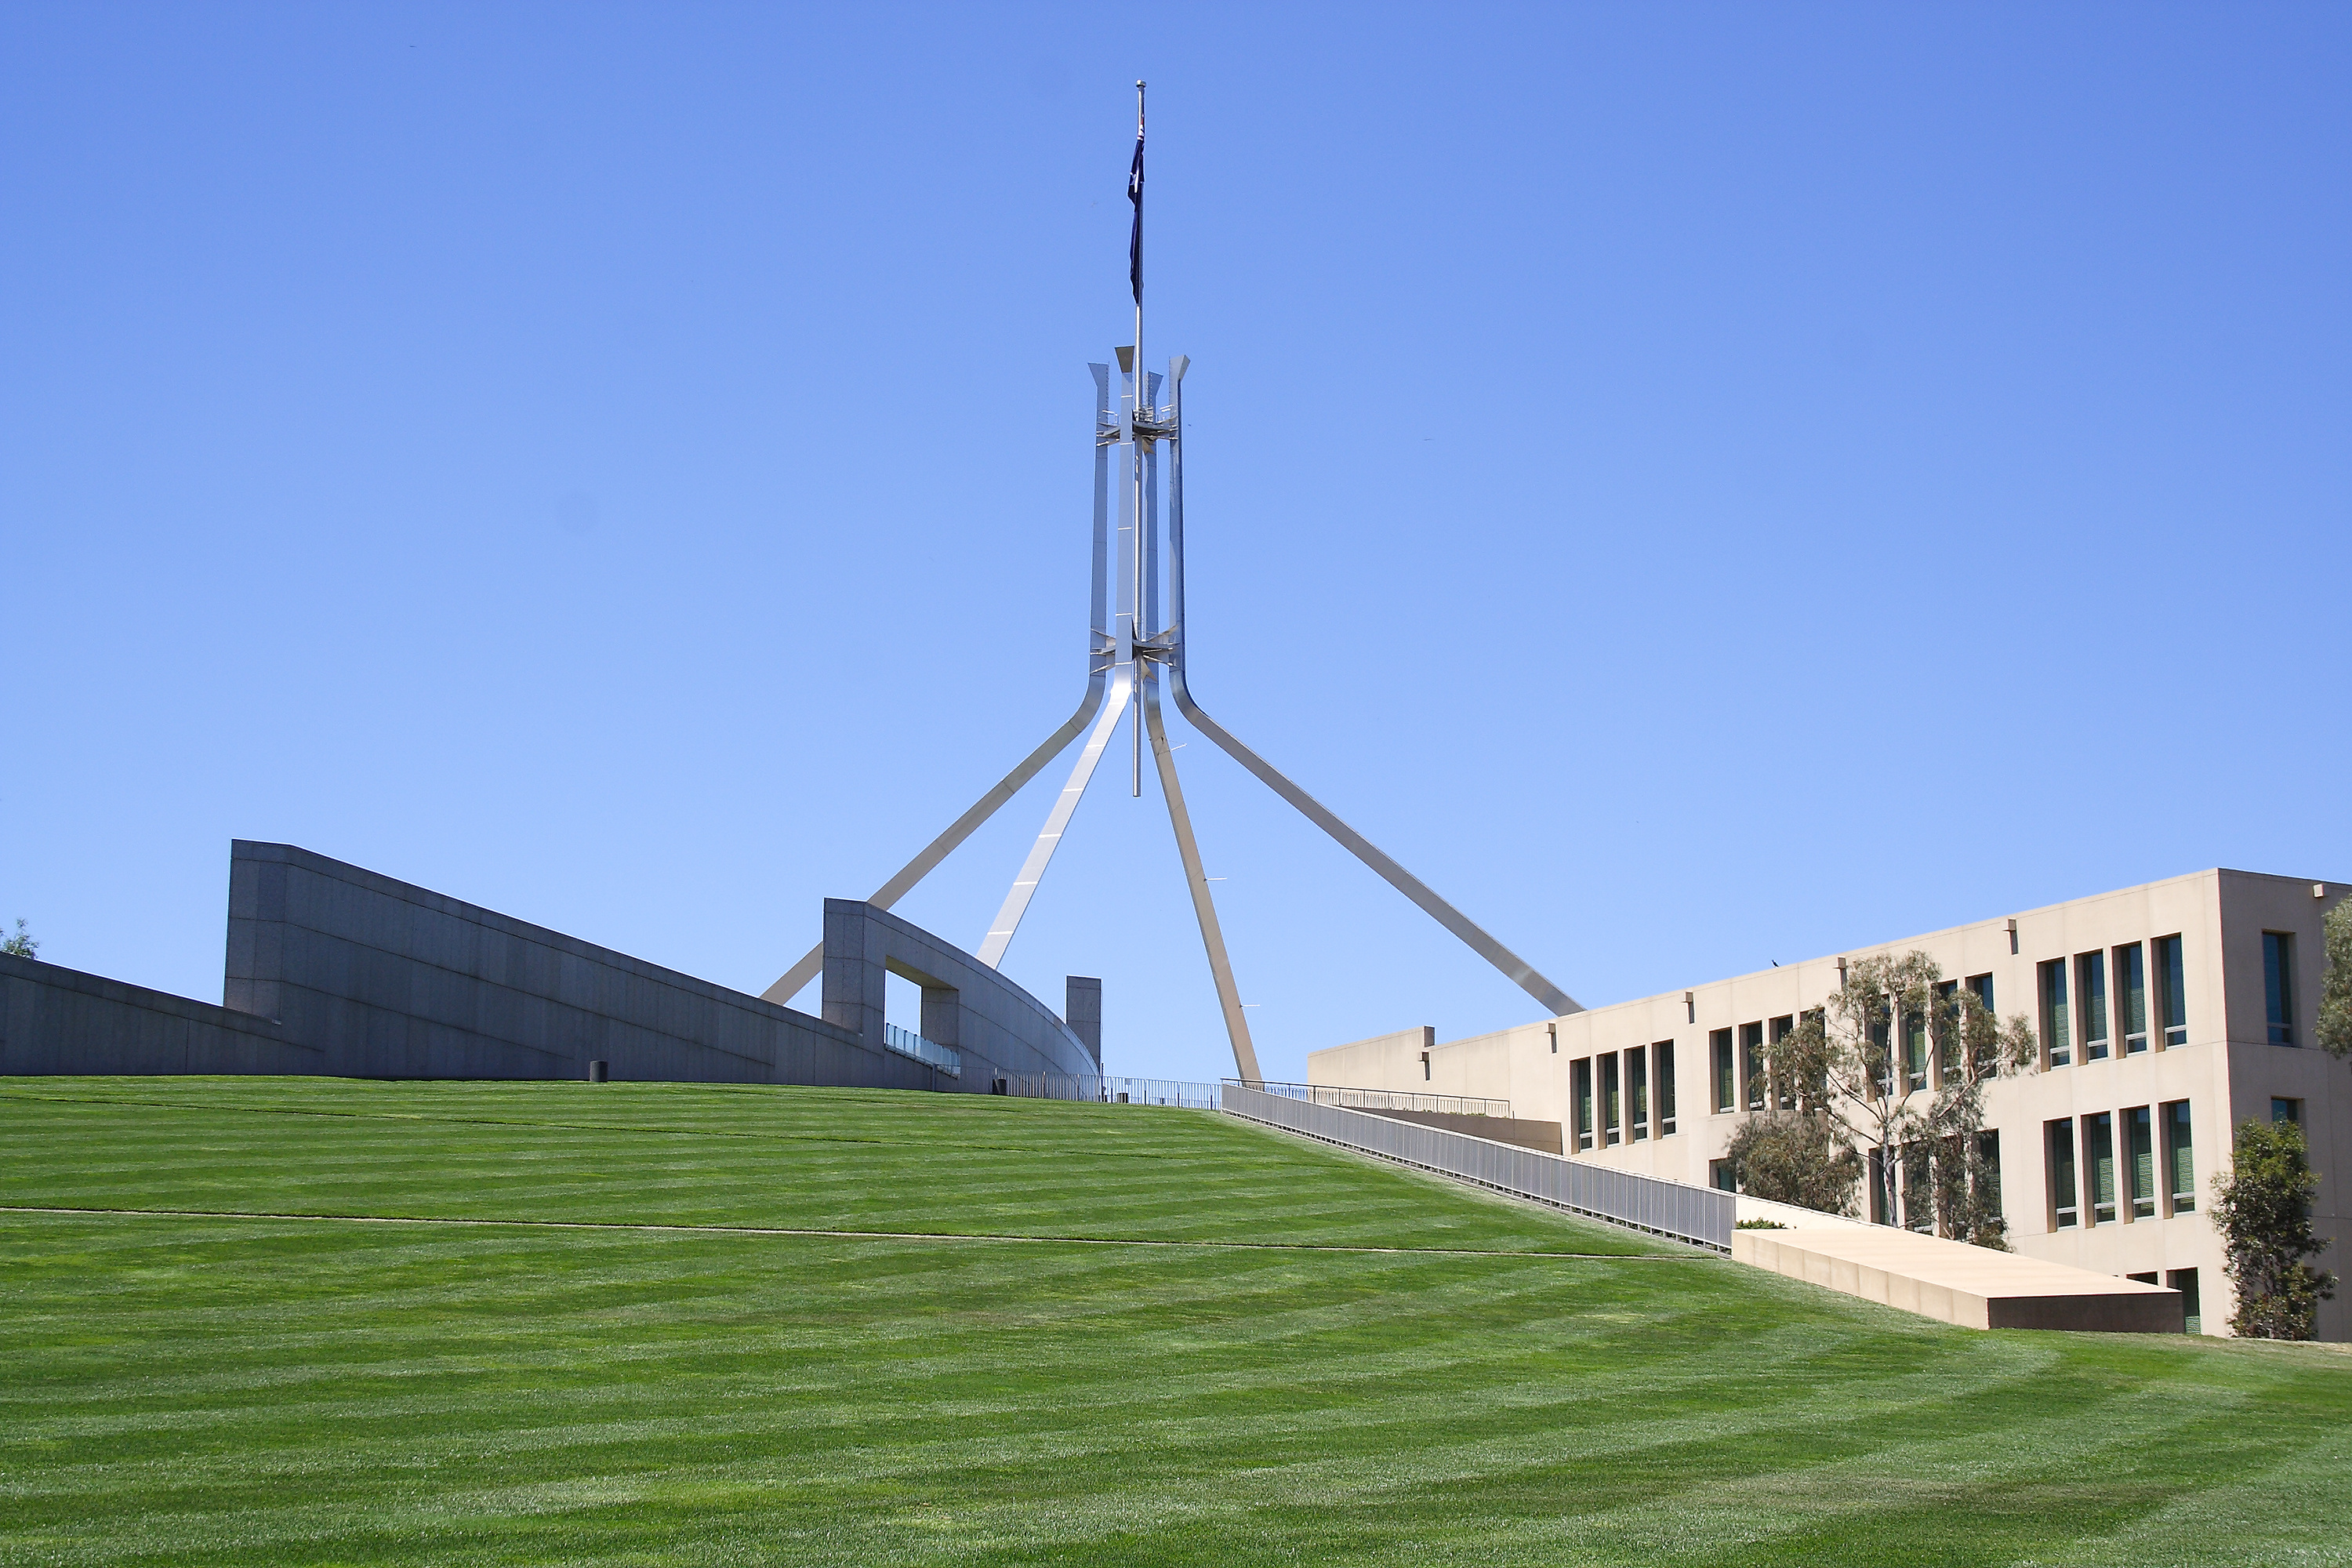 THE RISING BACKBENCHERS: MPs AND SENATORS TO WATCH IN 2021 (PART ONE OF THREE)